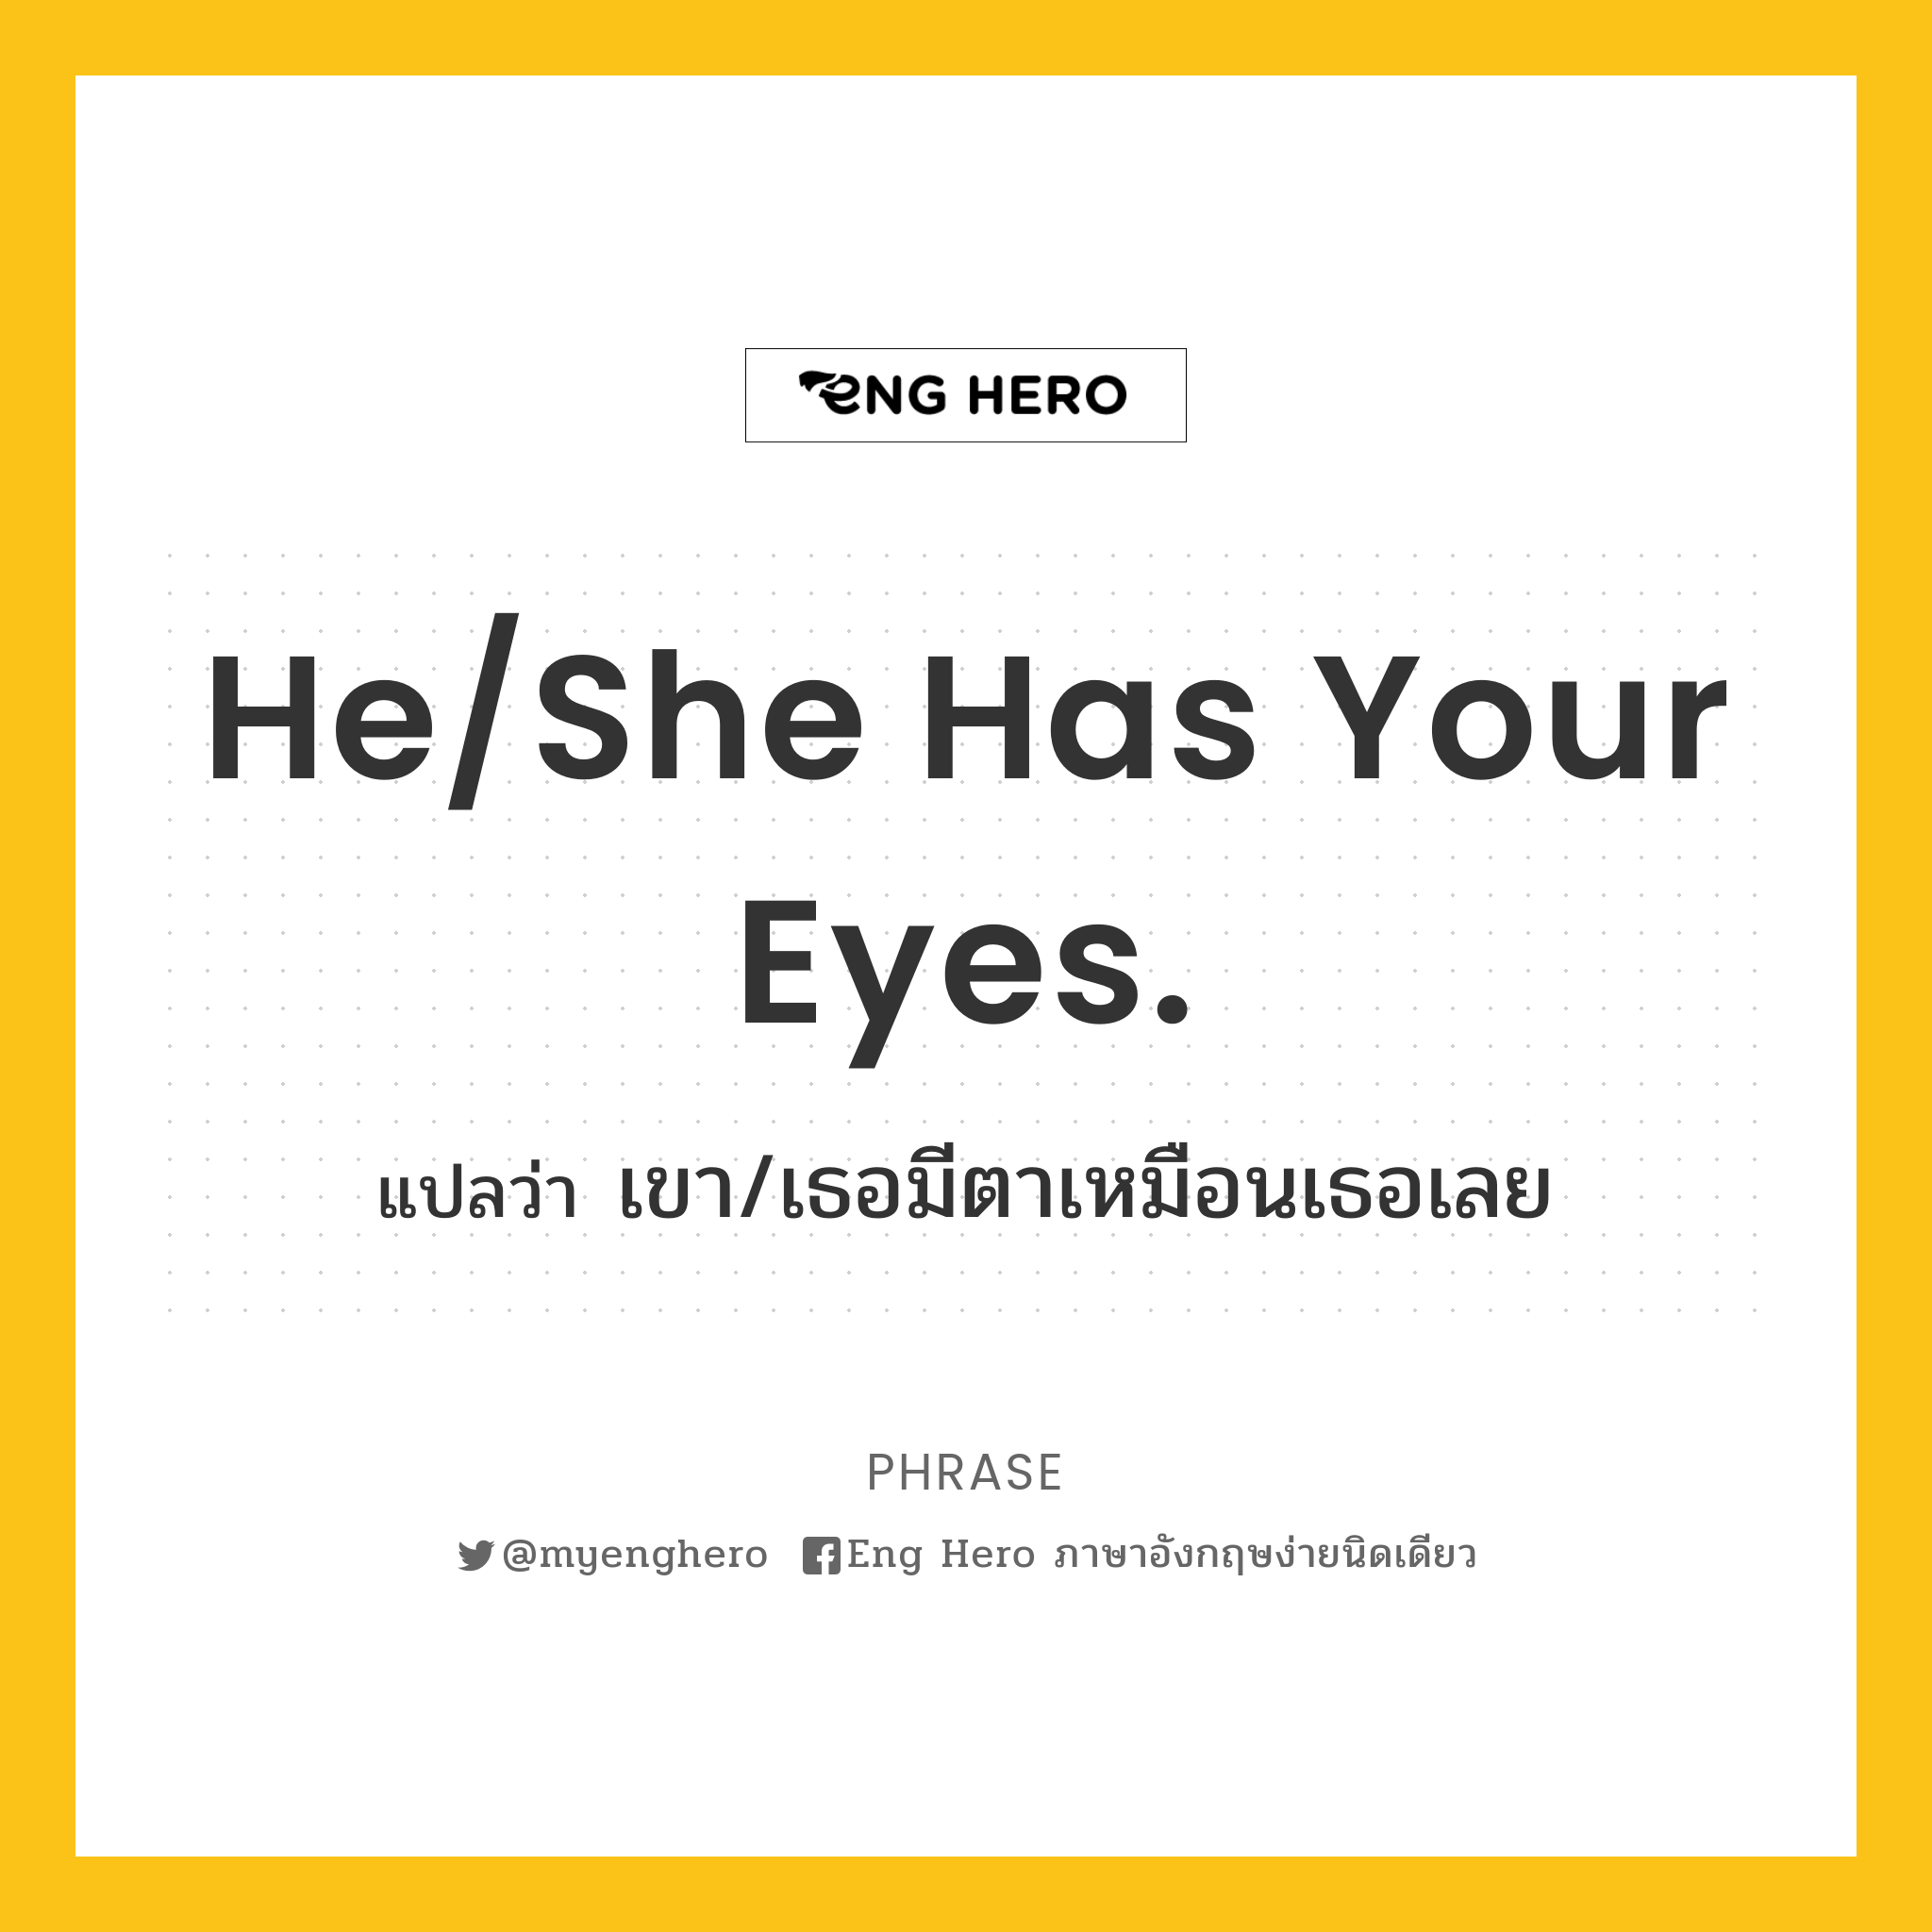 He/She has your eyes.